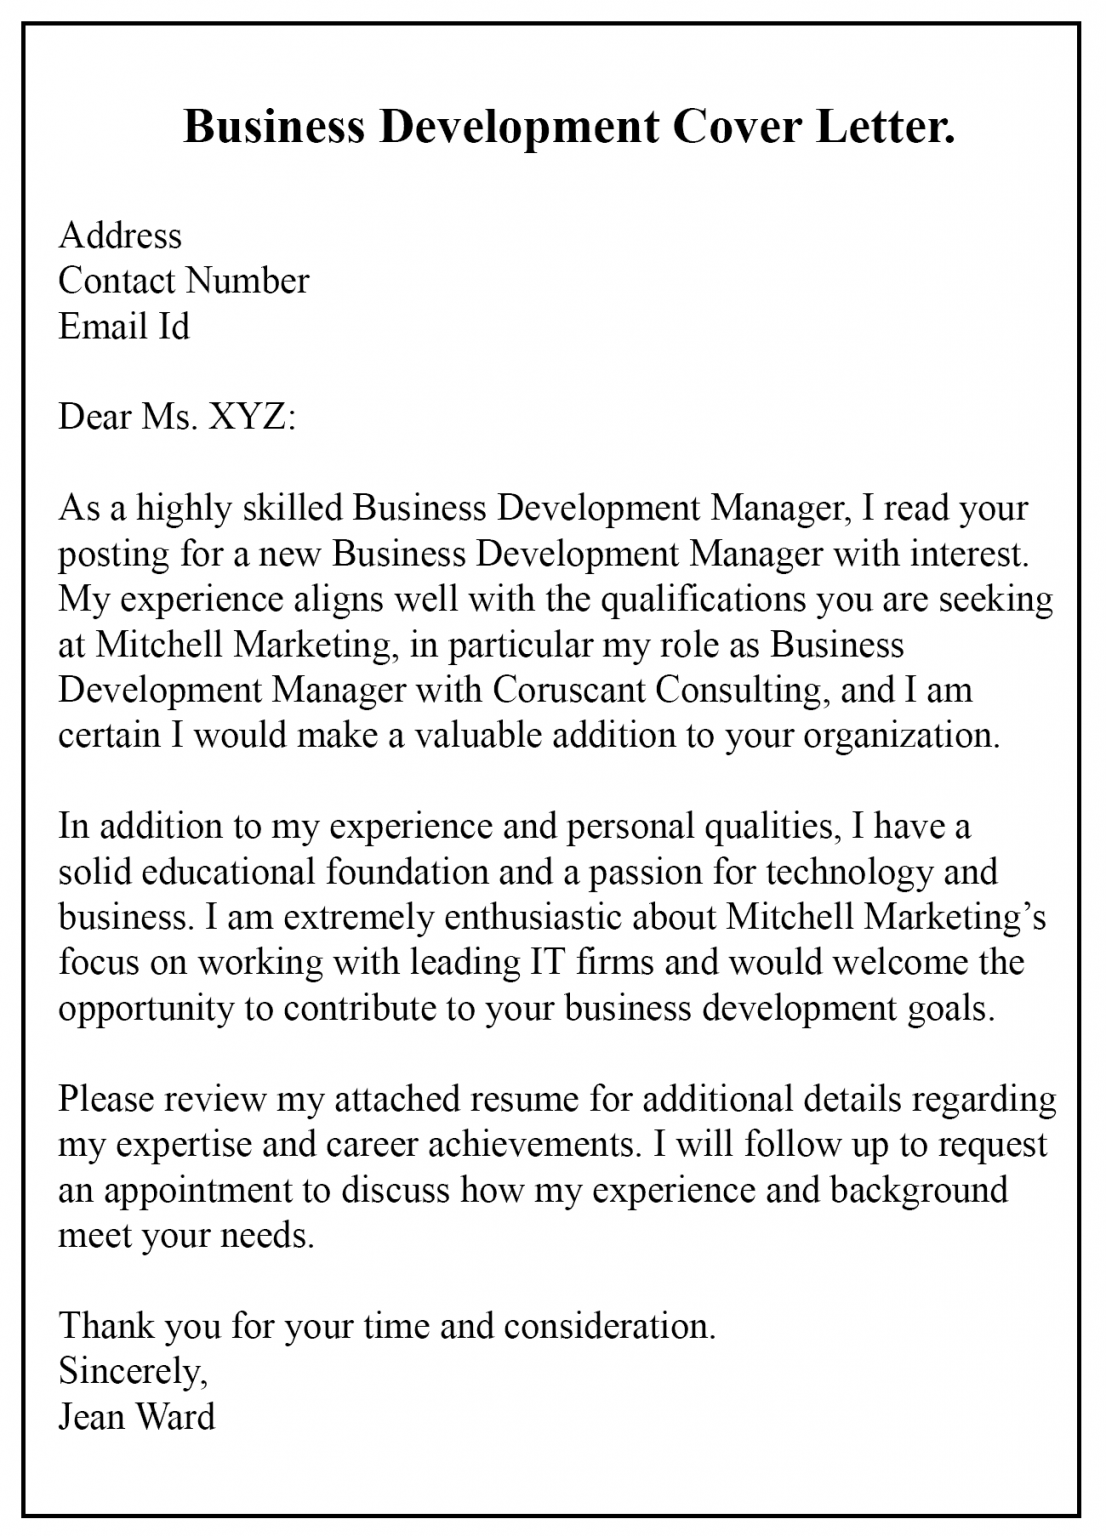 sample cover letter for business development officer with no experience